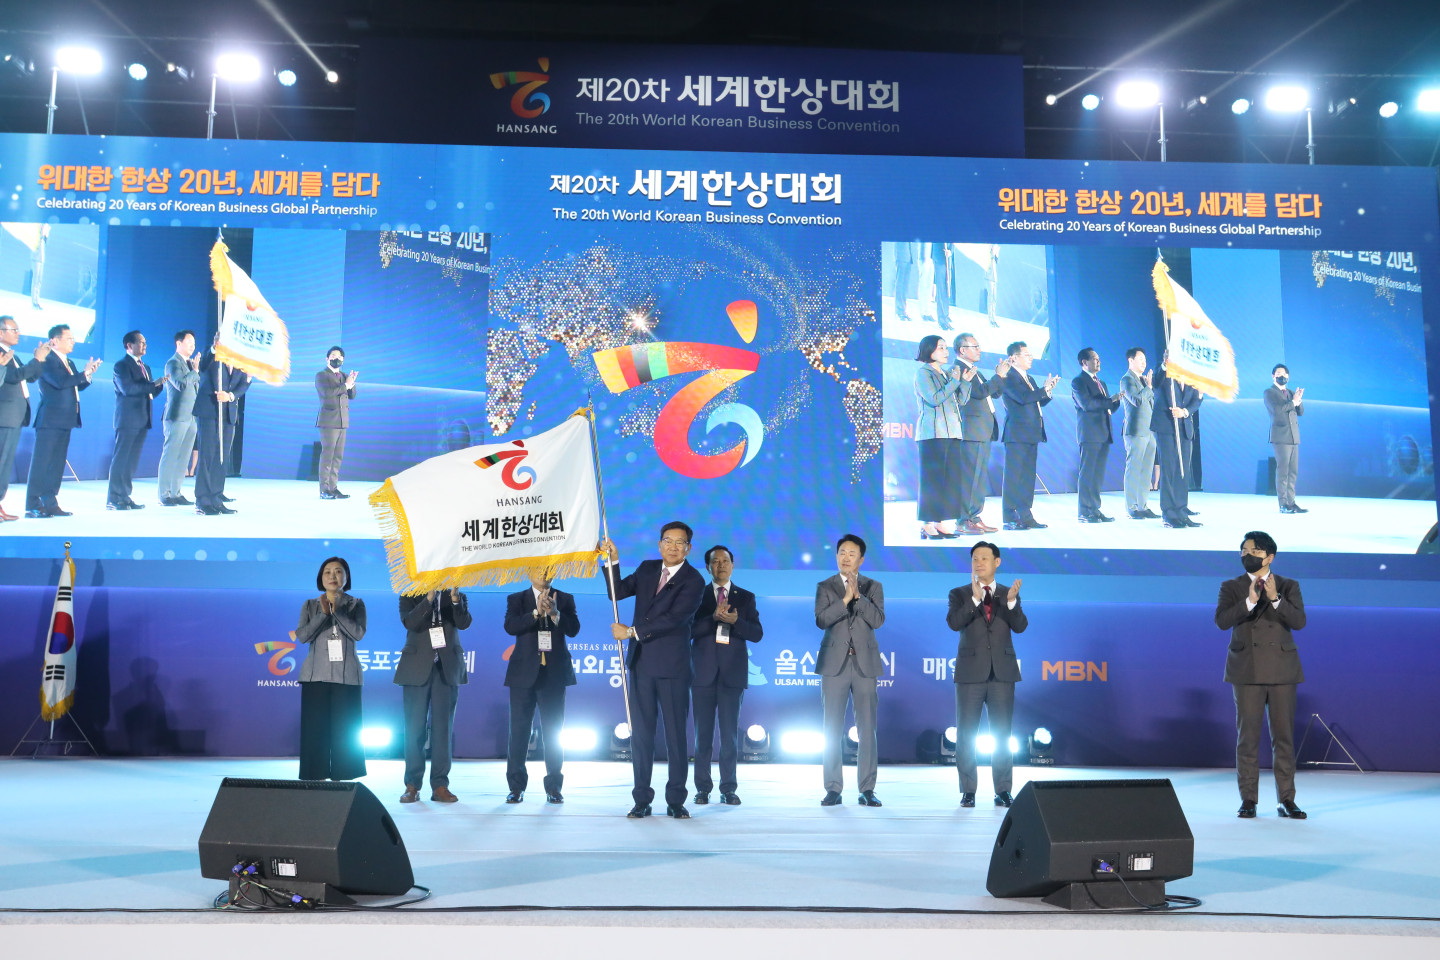 Convention Chief Kim Jeom-bae announcing the opening of the 20th Korean World Business Convention while waving the convention flag